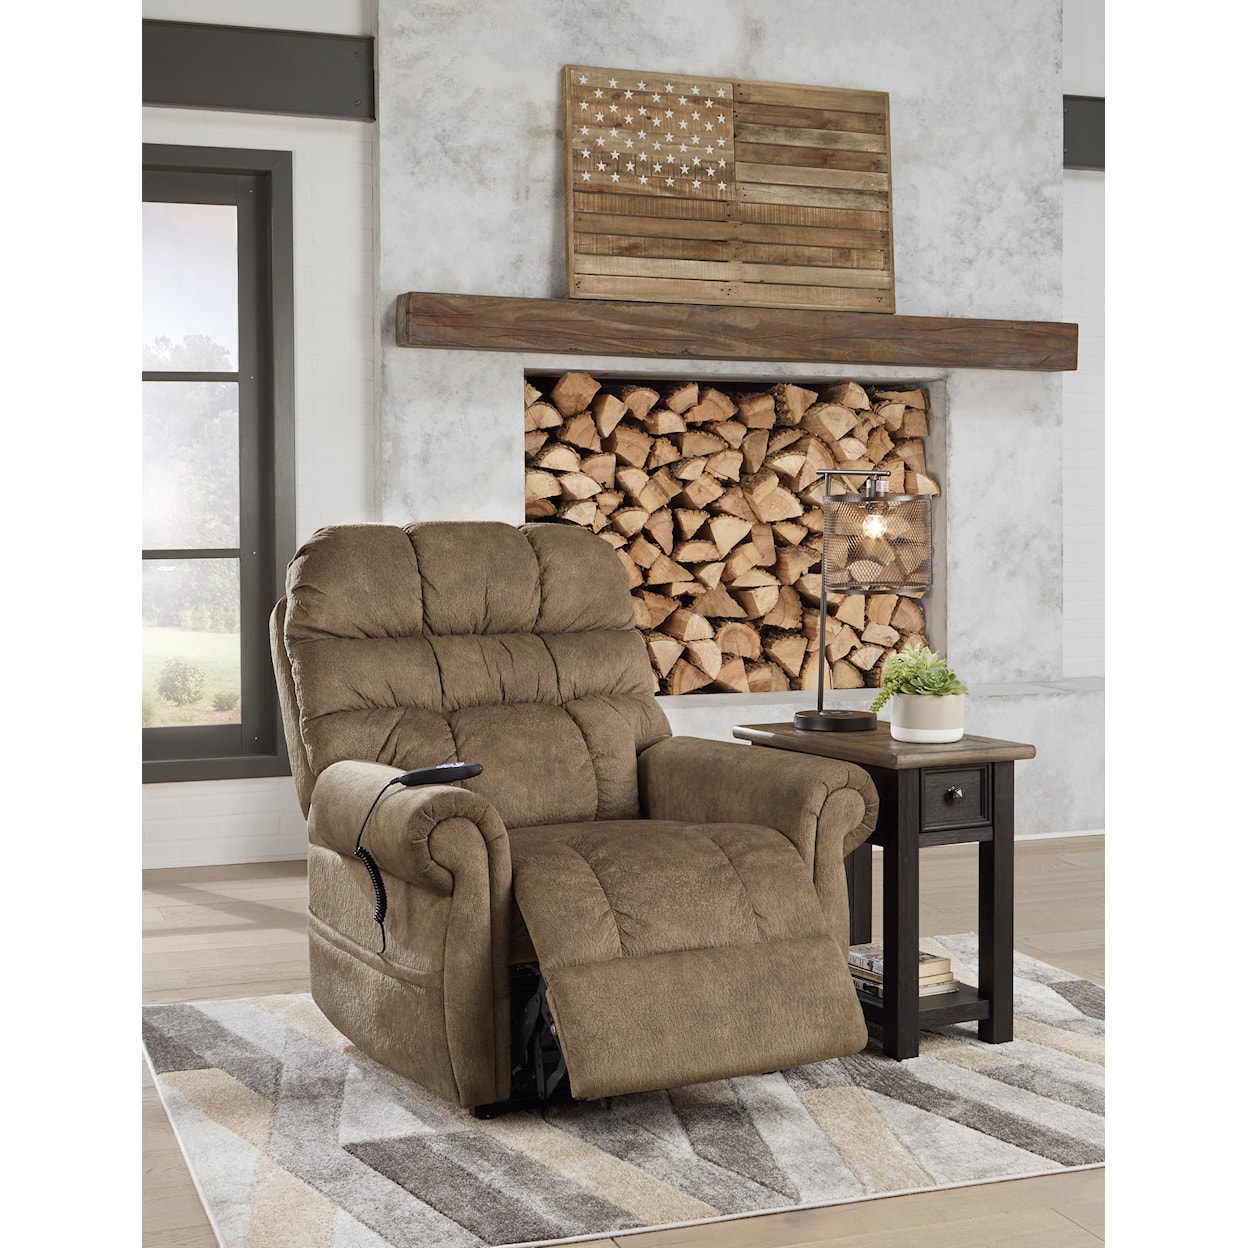 Signature Design by Ashley Mopton Power Lift Recliner